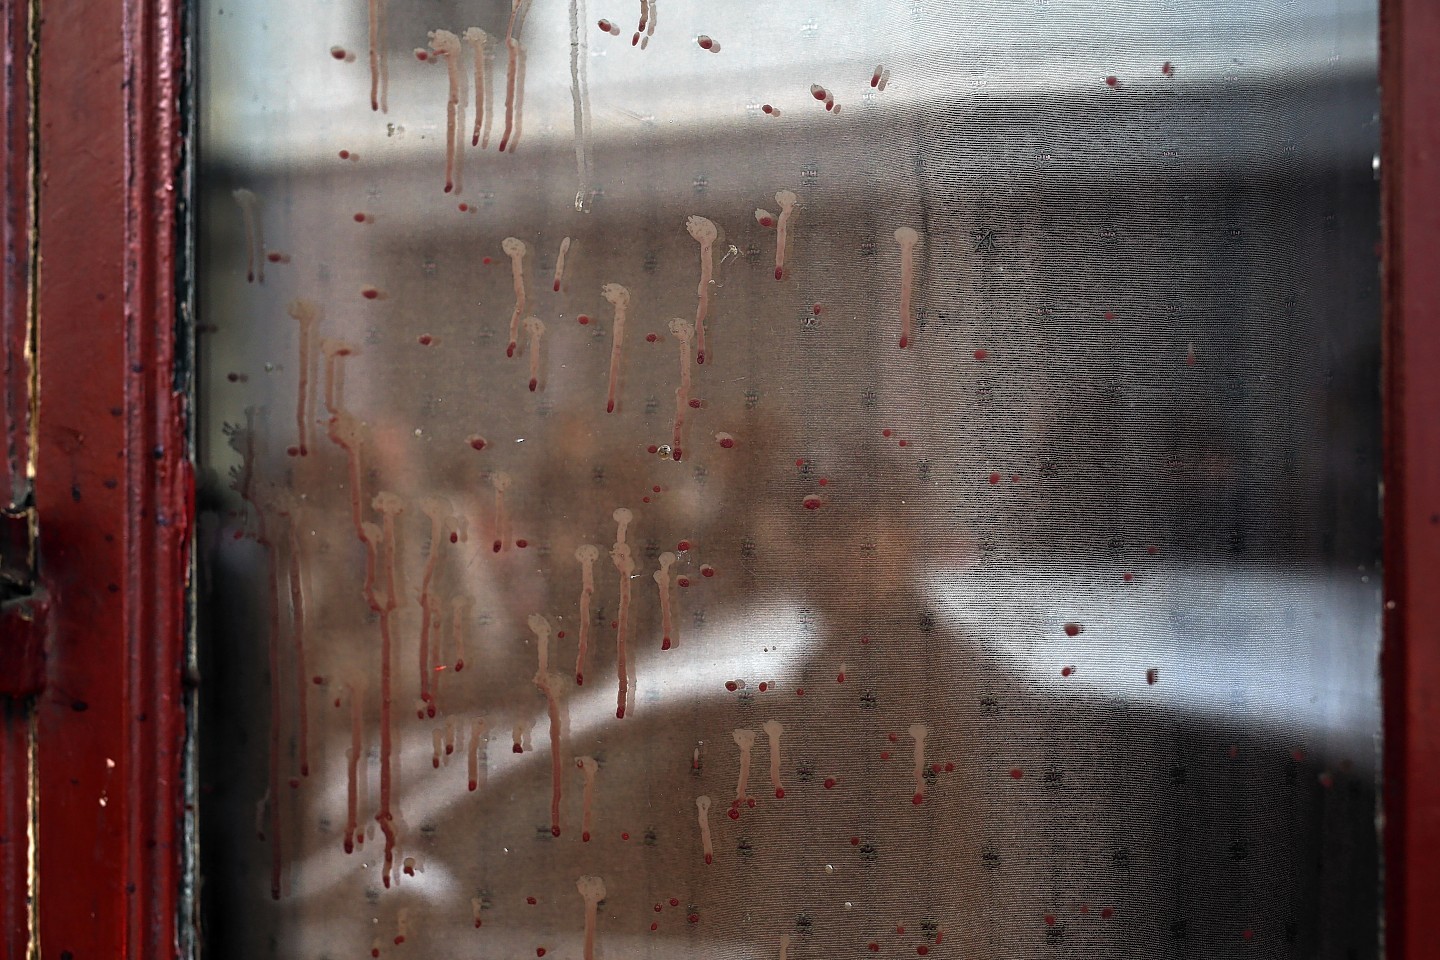 Dried blood can be seen on the window of the Carillon cafe in Paris 